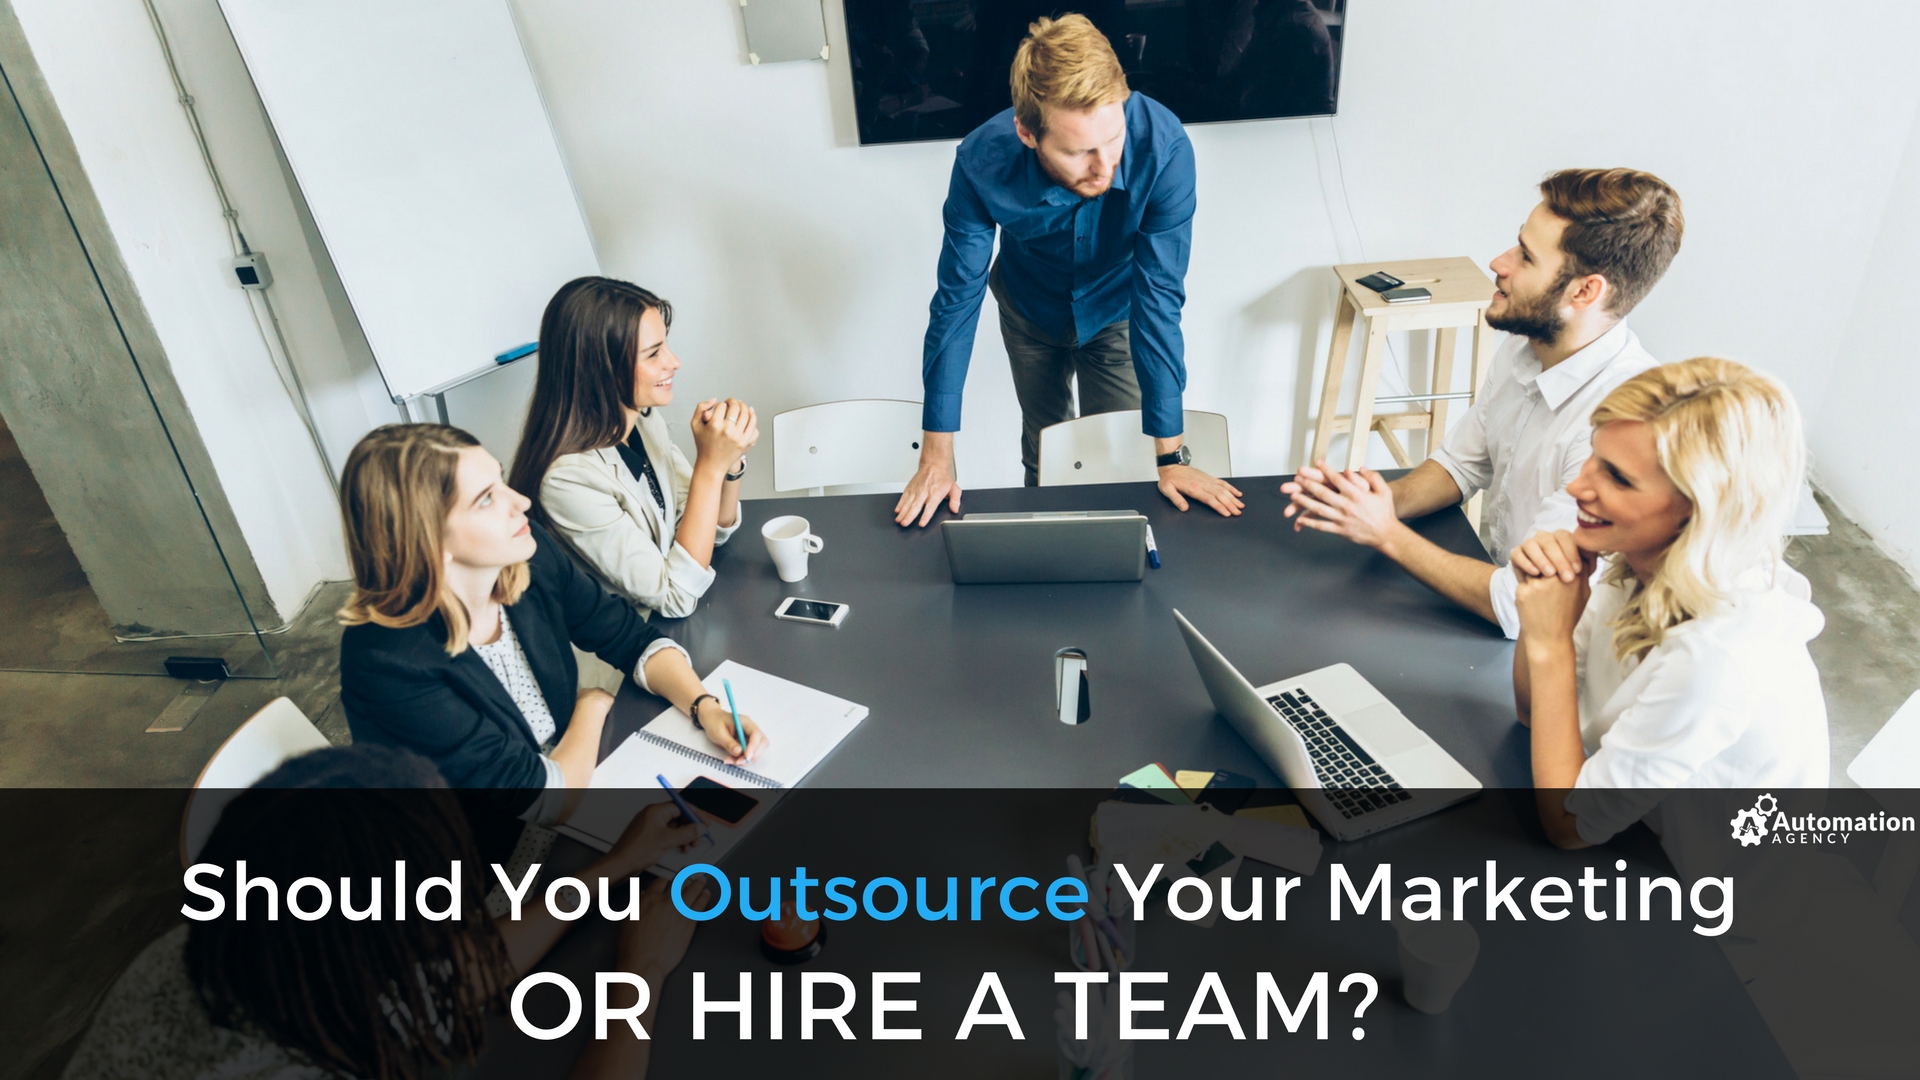 Should You Outsource Your Marketing or Hire a Team? Here's How to Decide